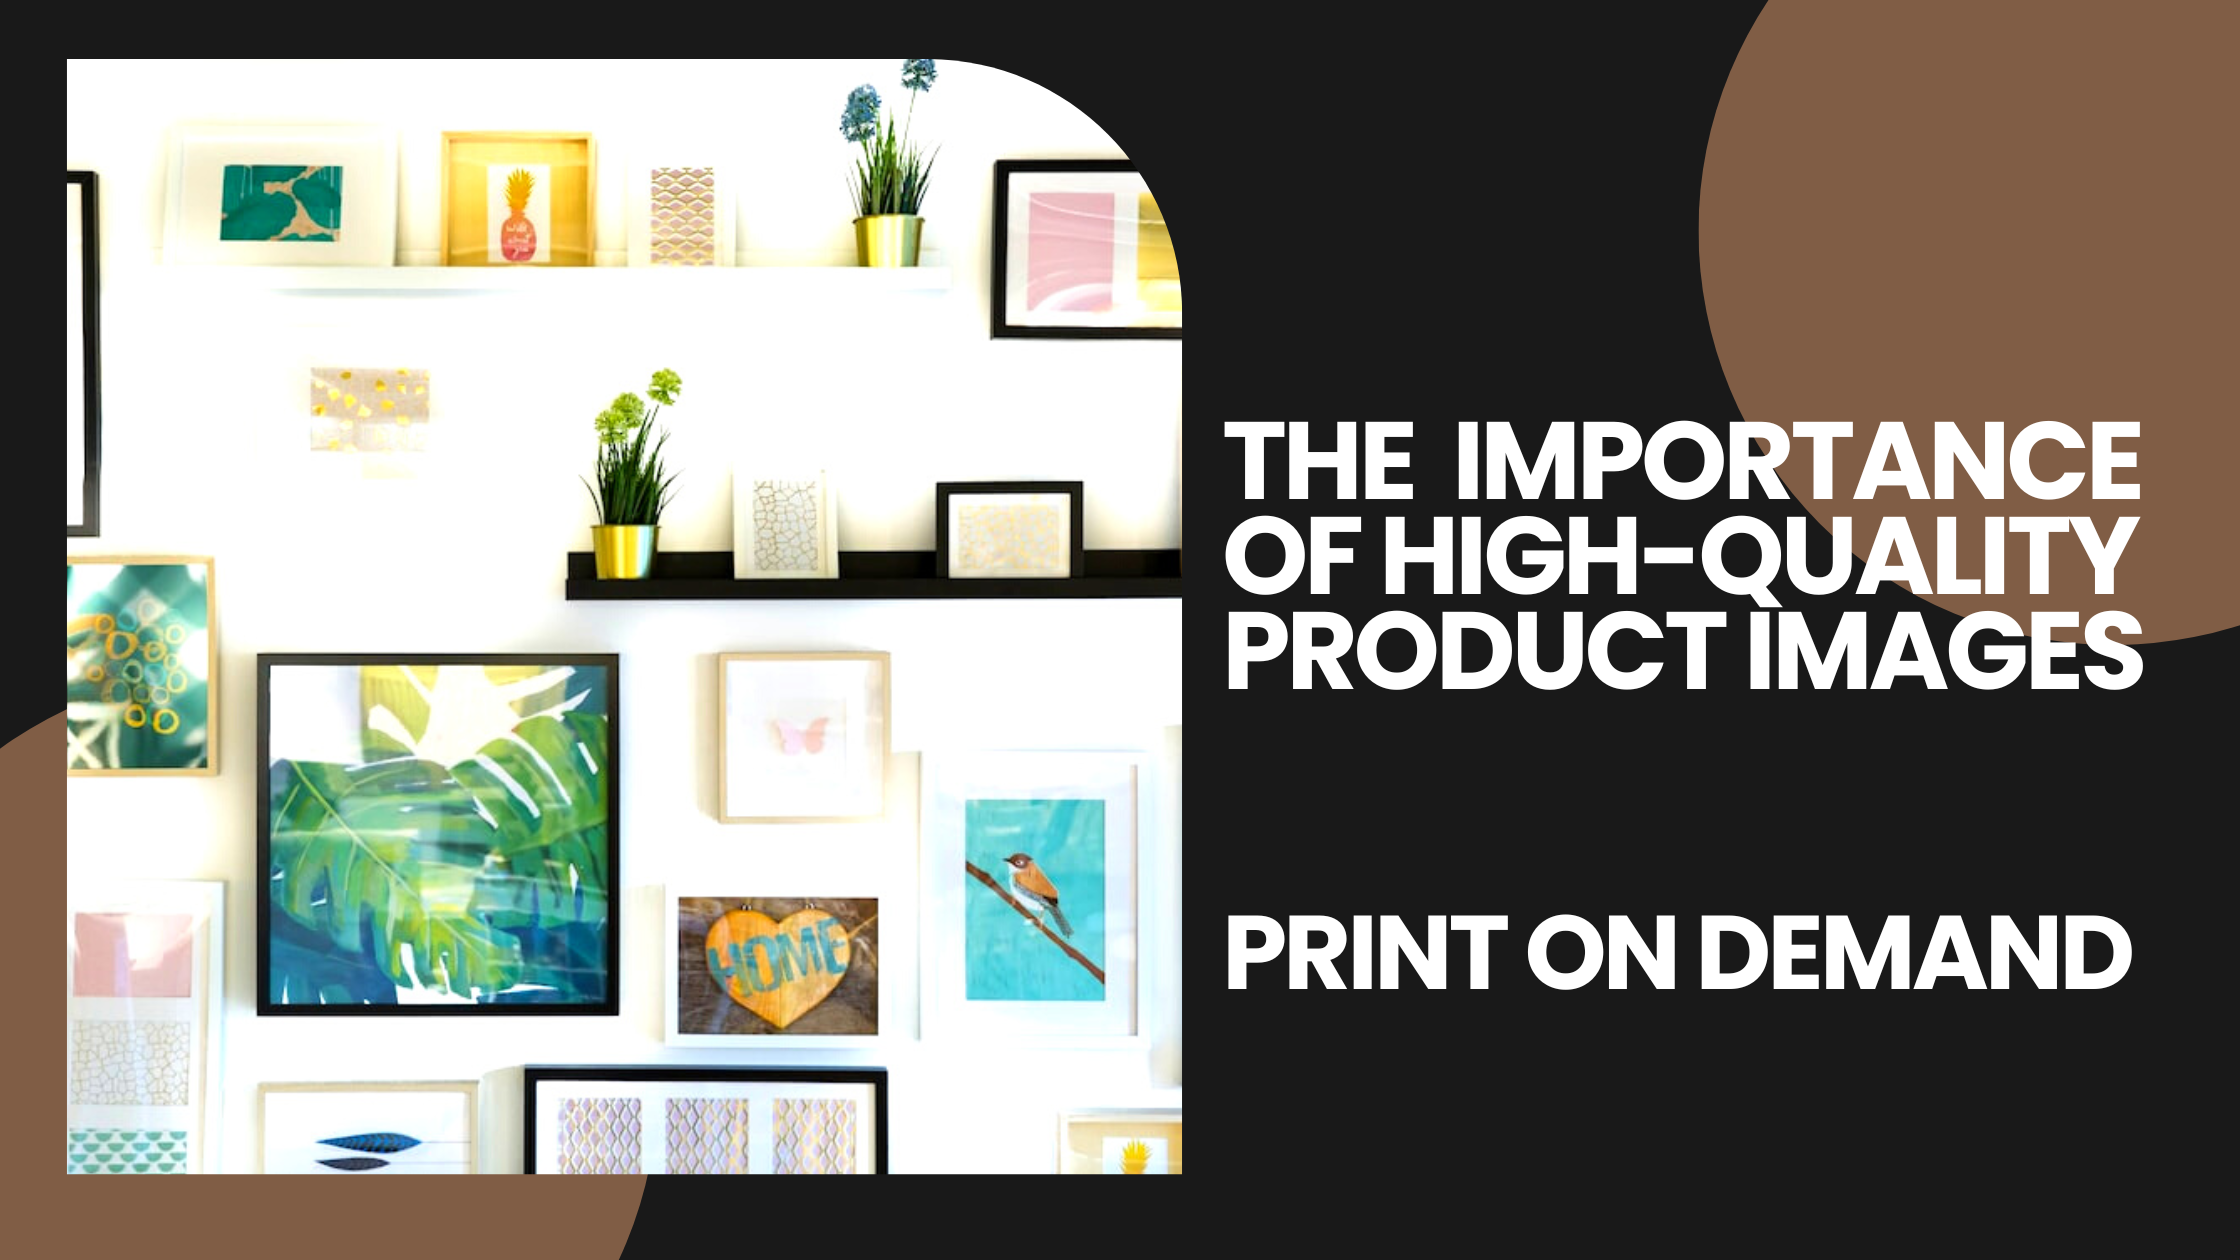 The Importance of High-Quality Product Images for Print on Demand